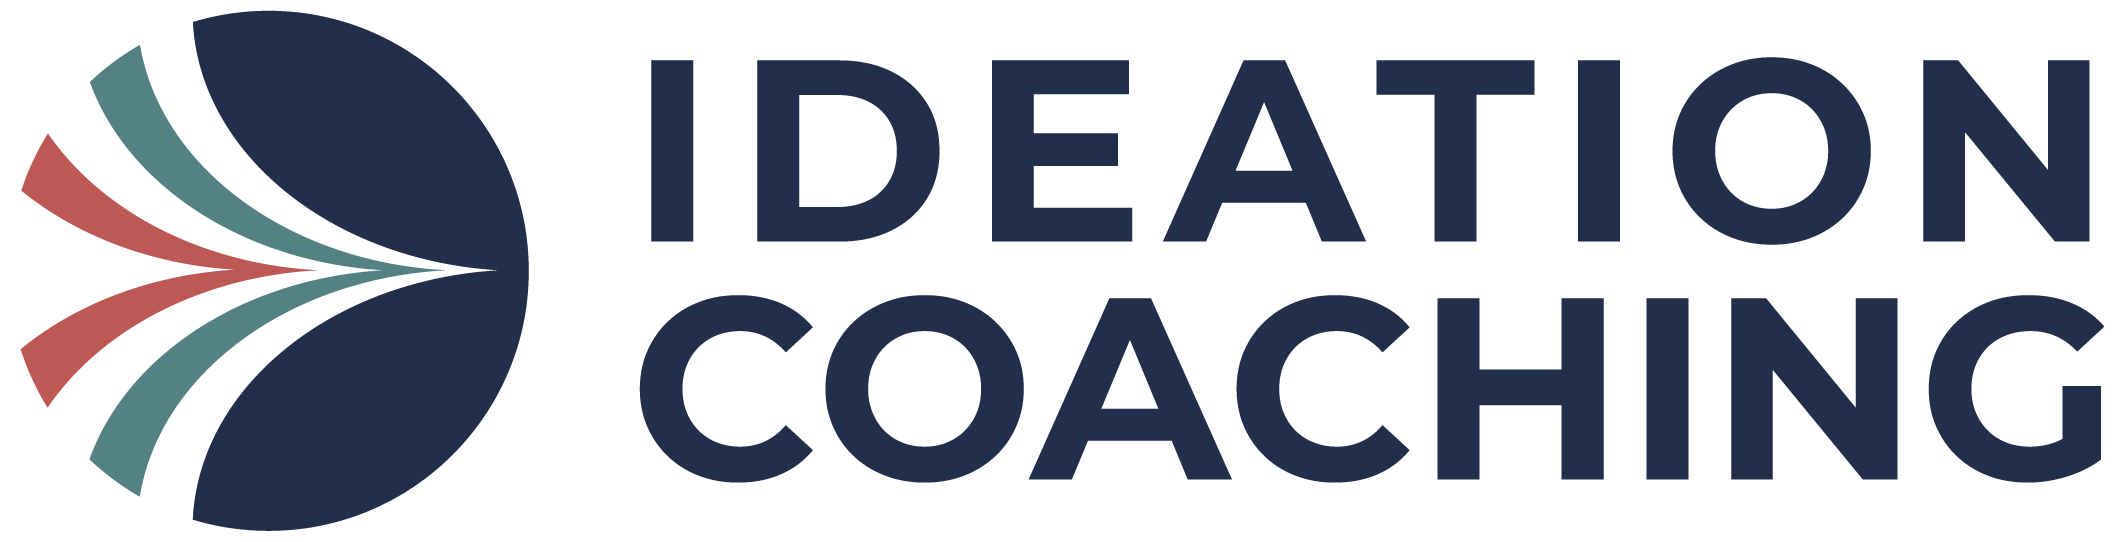 Ideation Coaching_Full-Logo_Colour.png